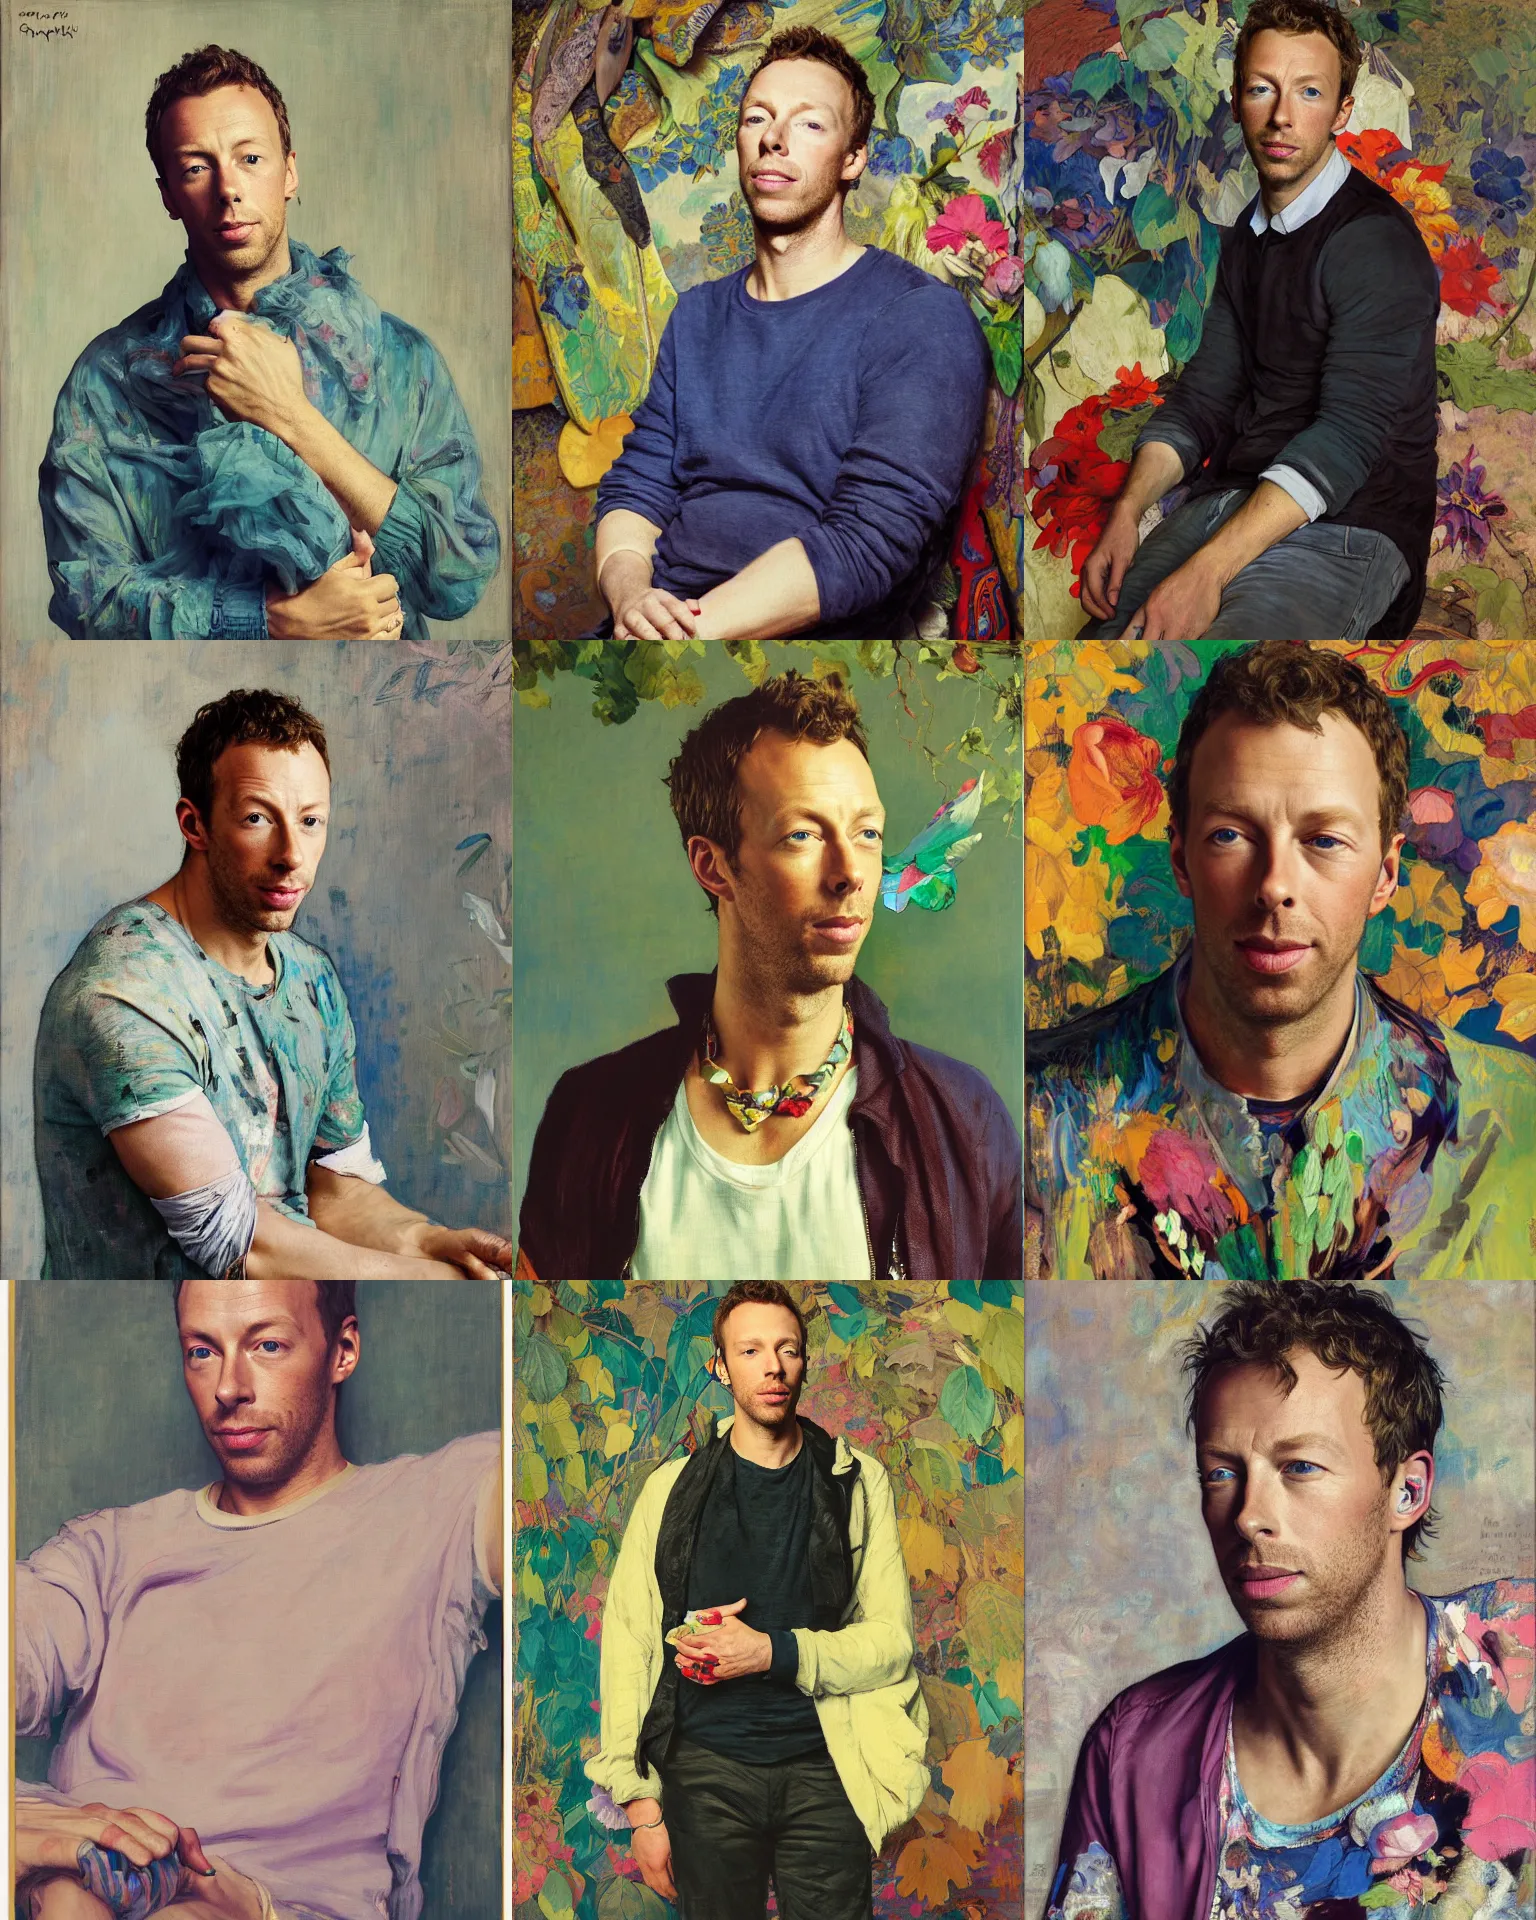 Prompt: chris martin from coldplay, portrait painting by richard schmid, ilya repin, kehinde wiley, frans hals, studio ghibli, loish, alphonse mucha, fashion photography